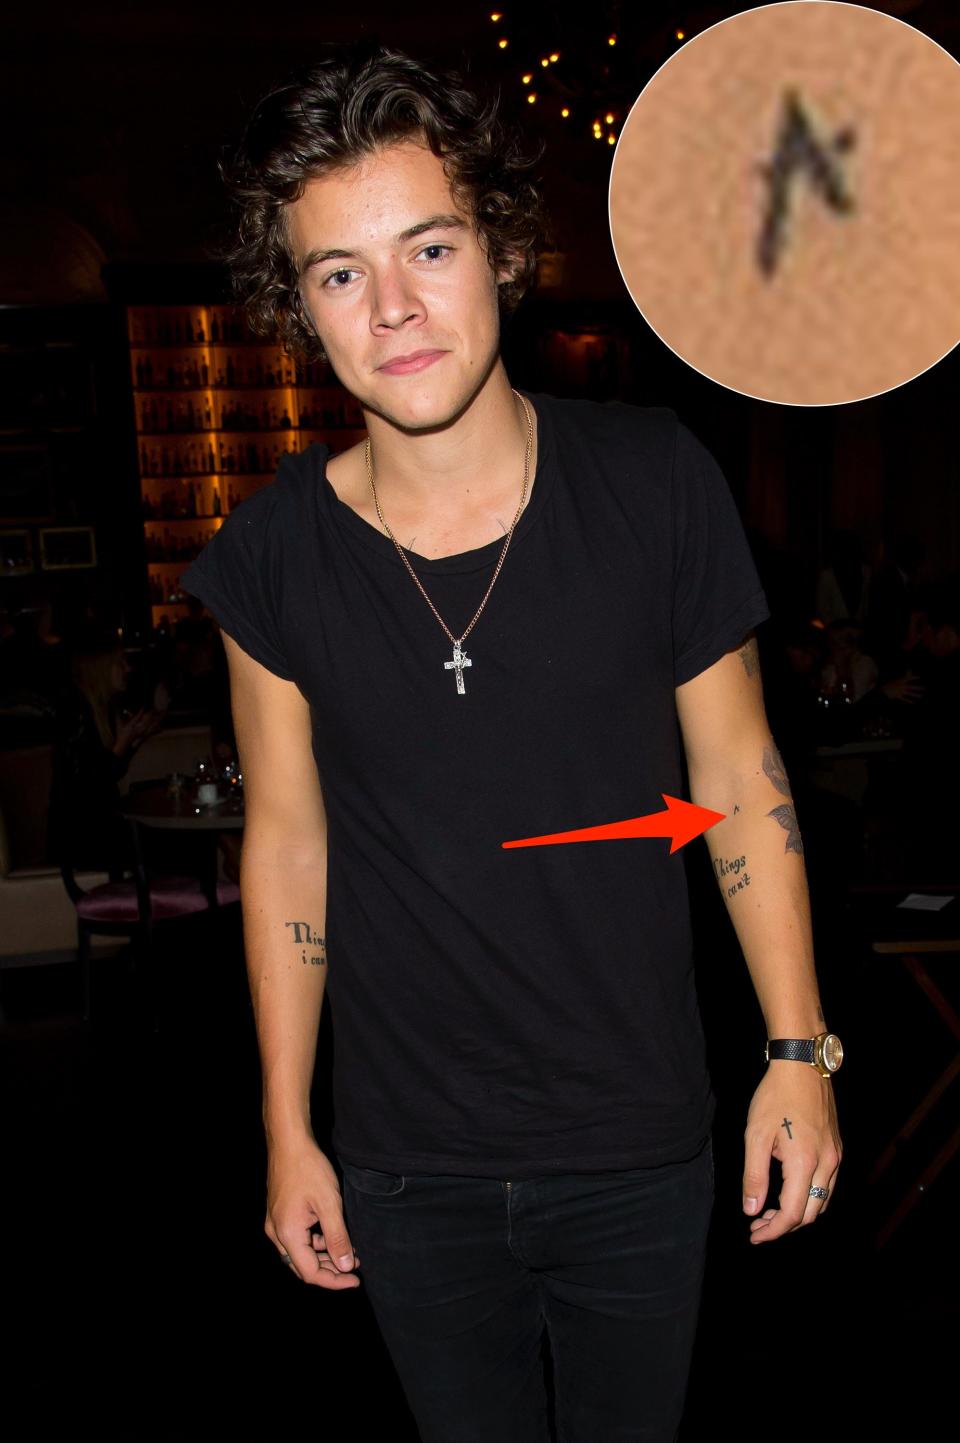 A red arrow pointing to Harry Styles' "A" tattoo on his arm.